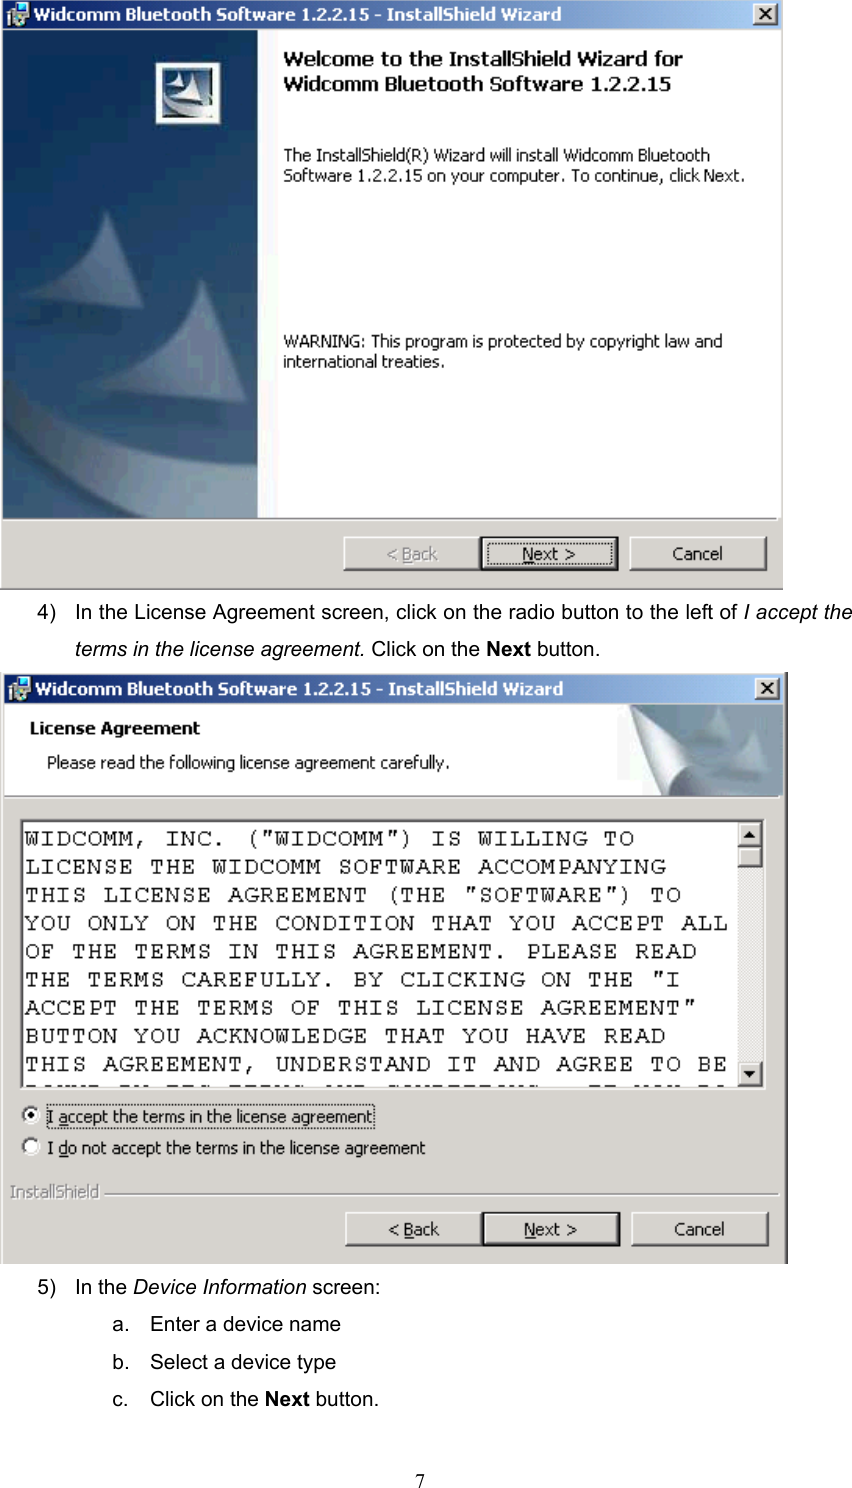  7  4)  In the License Agreement screen, click on the radio button to the left of I accept the terms in the license agreement. Click on the Next button.    5) In the Device Information screen: a.  Enter a device name b.  Select a device type c.  Click on the Next button. 